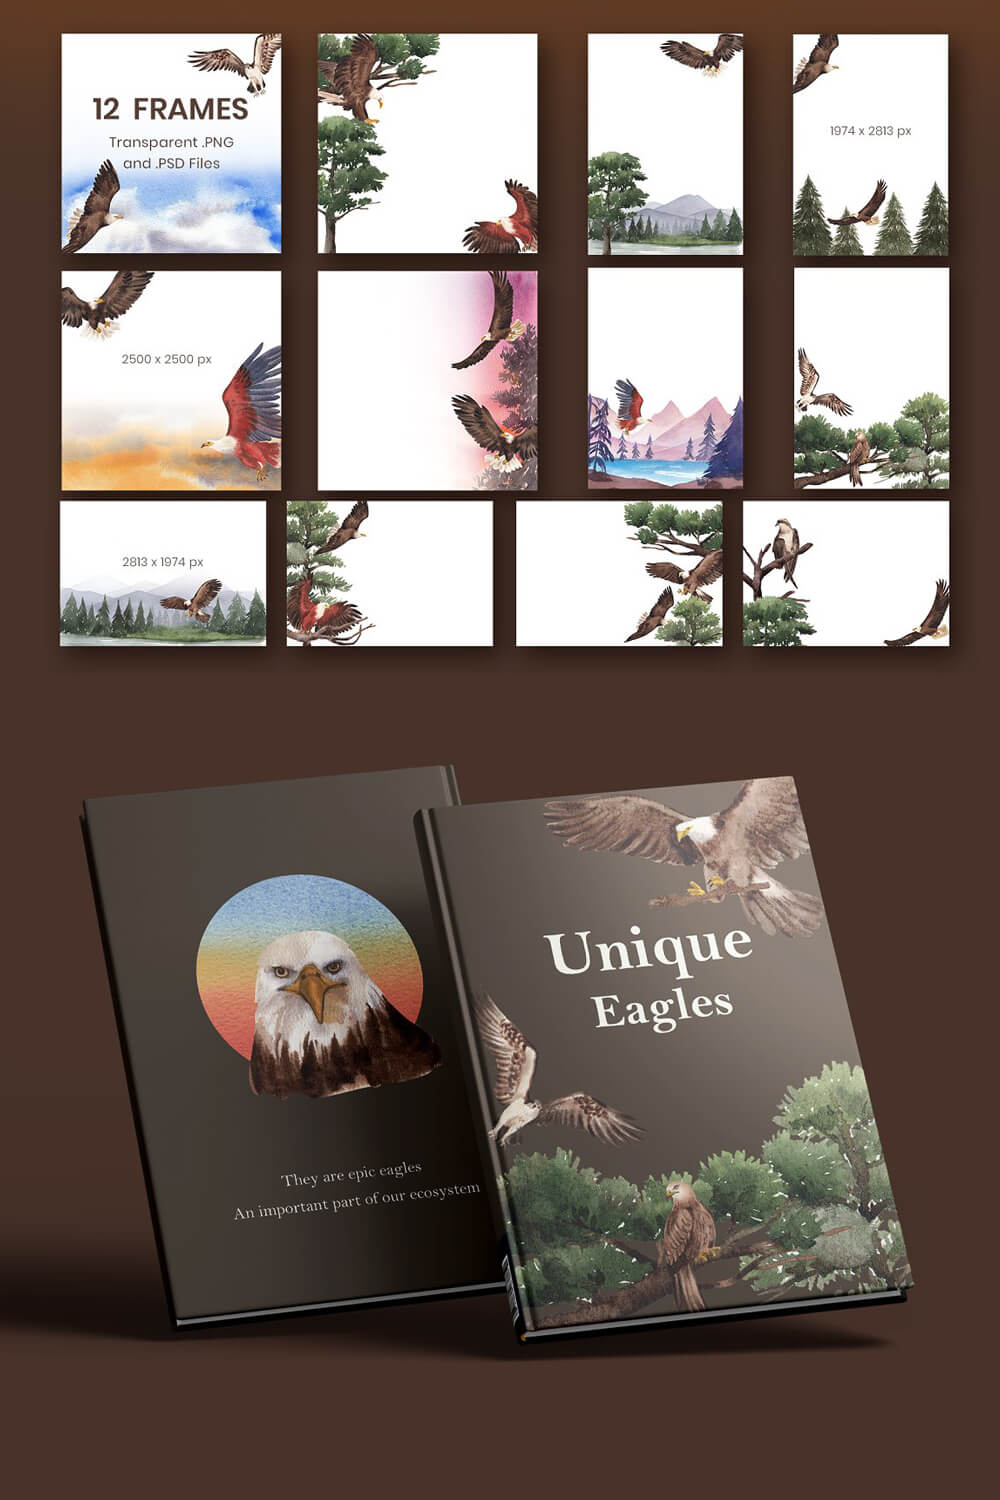 An example of the use of image elements of eagles.